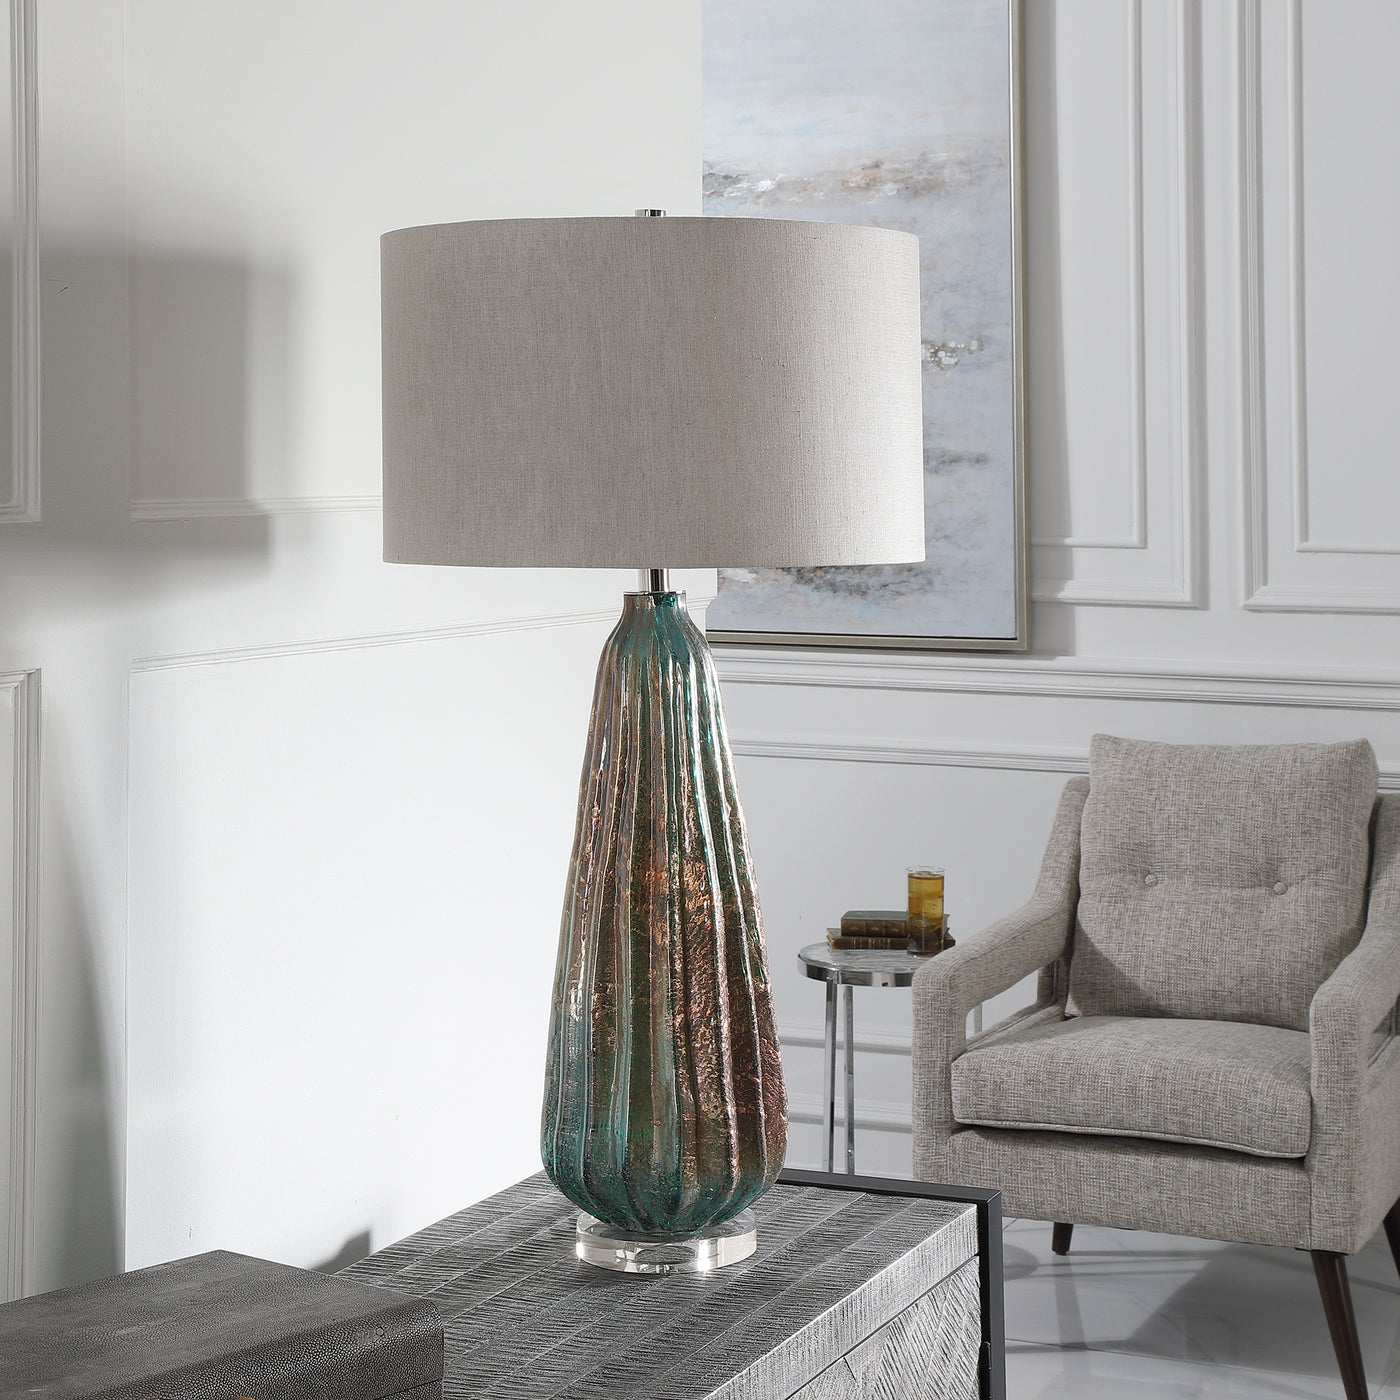 Elegant And Sophisticated, This Art Glass Table Lamp Displays A Deep Ridged Design With Colorful Light Blue And Rust Tones...